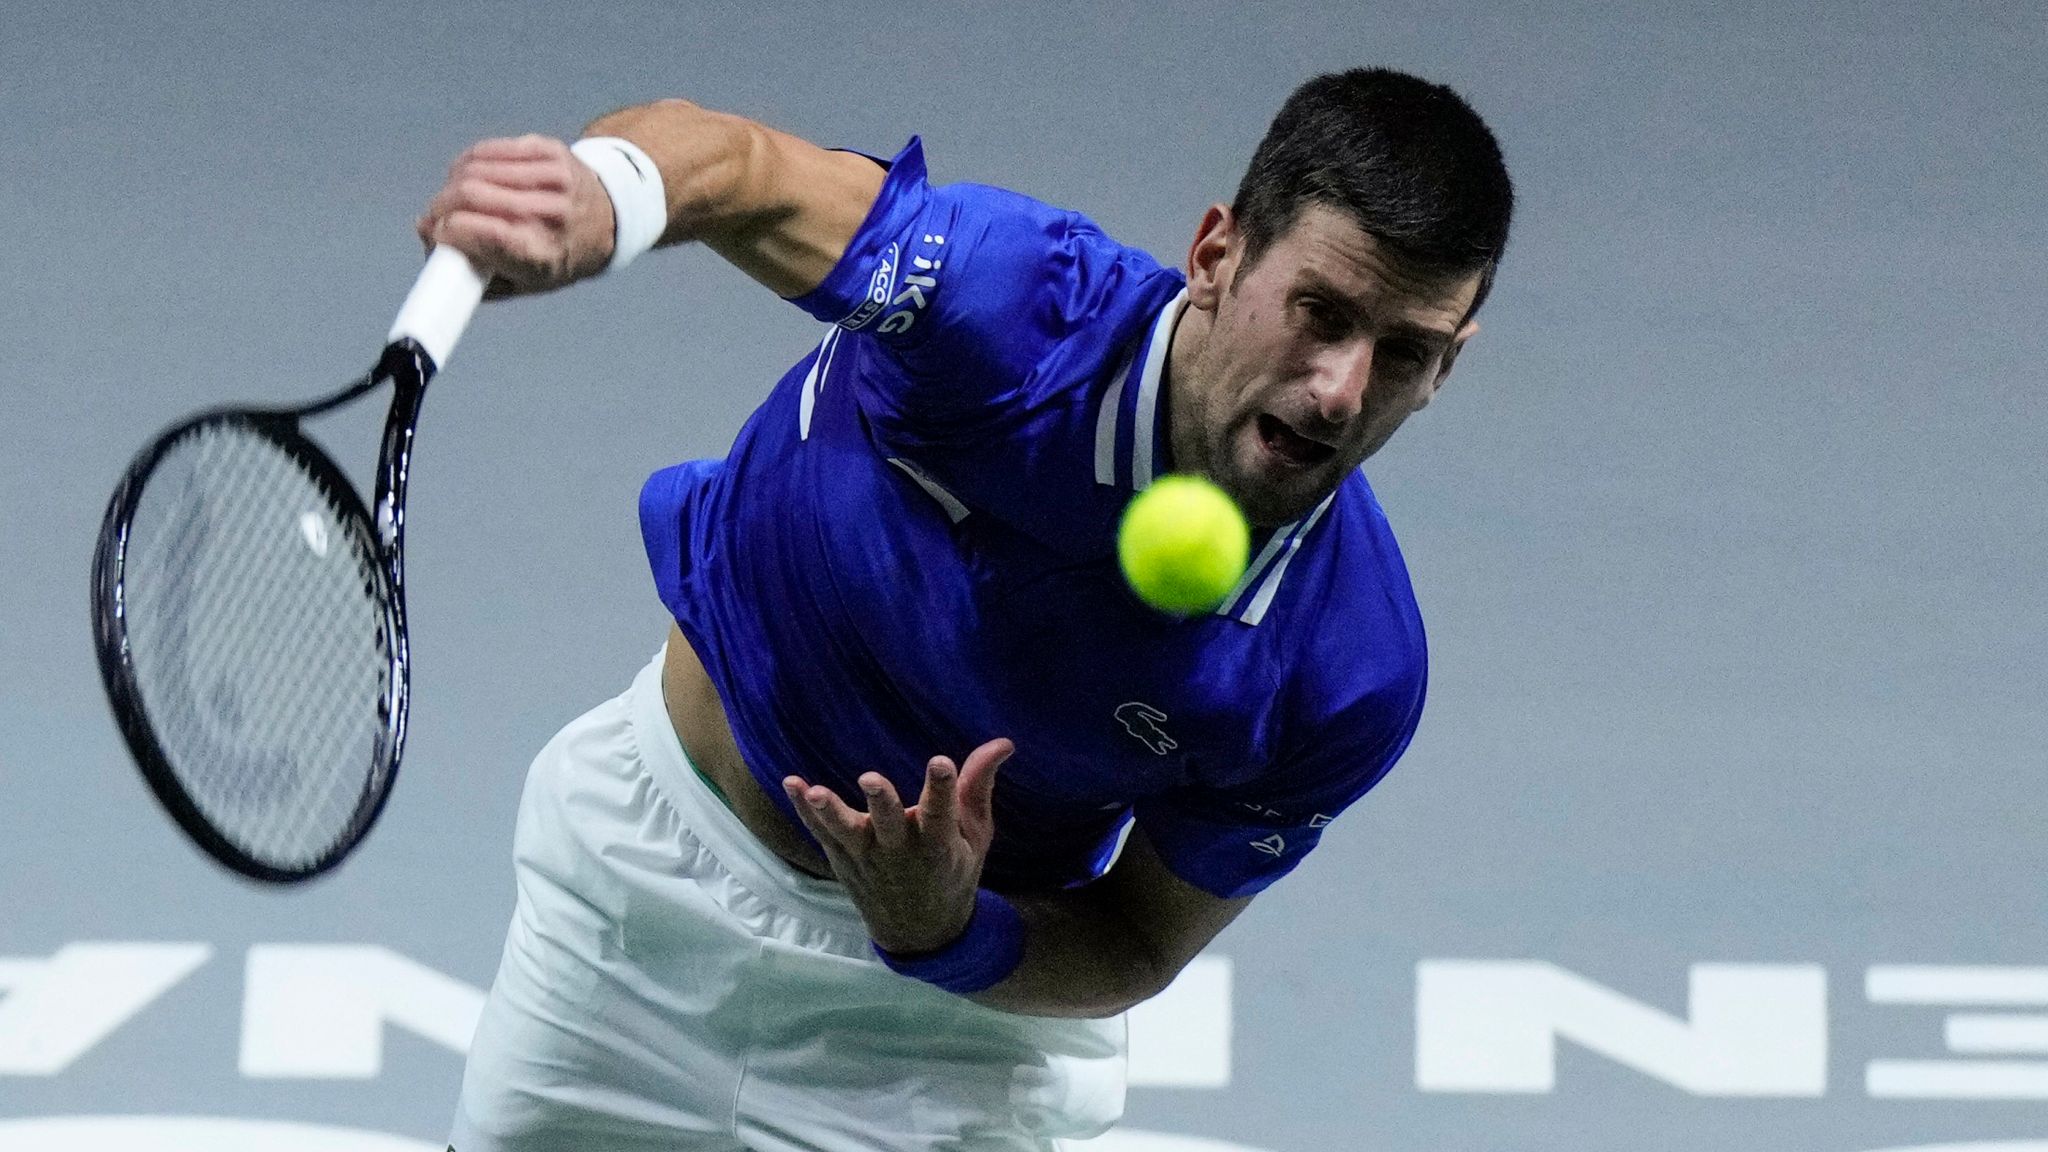 Novak Djokovic withdraws from ATP Cup in Sydney - raising further doubts Australian Open participation | News | Sky News